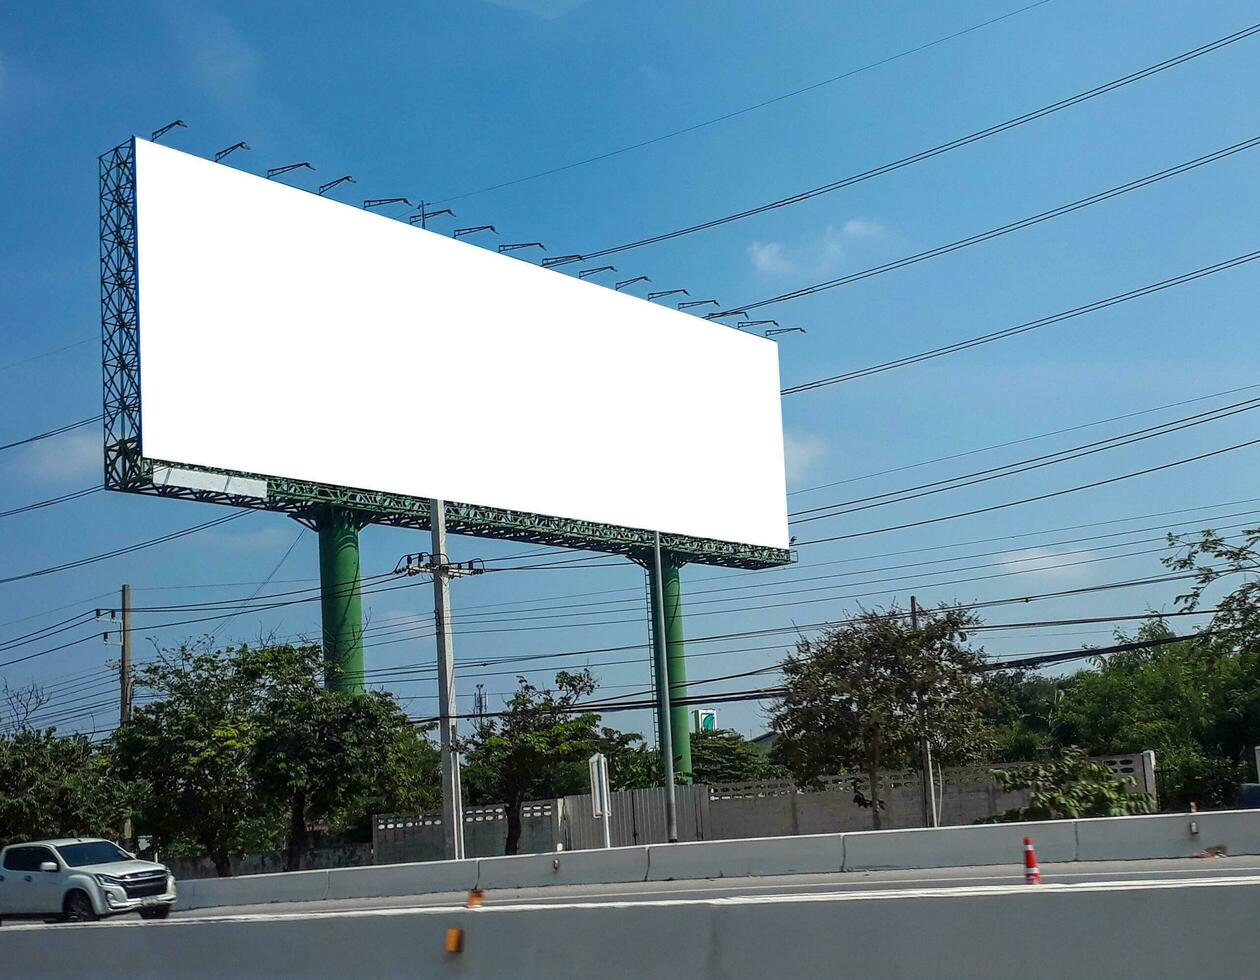 billboard blank for outdoor advertising poster at blue sky. photo